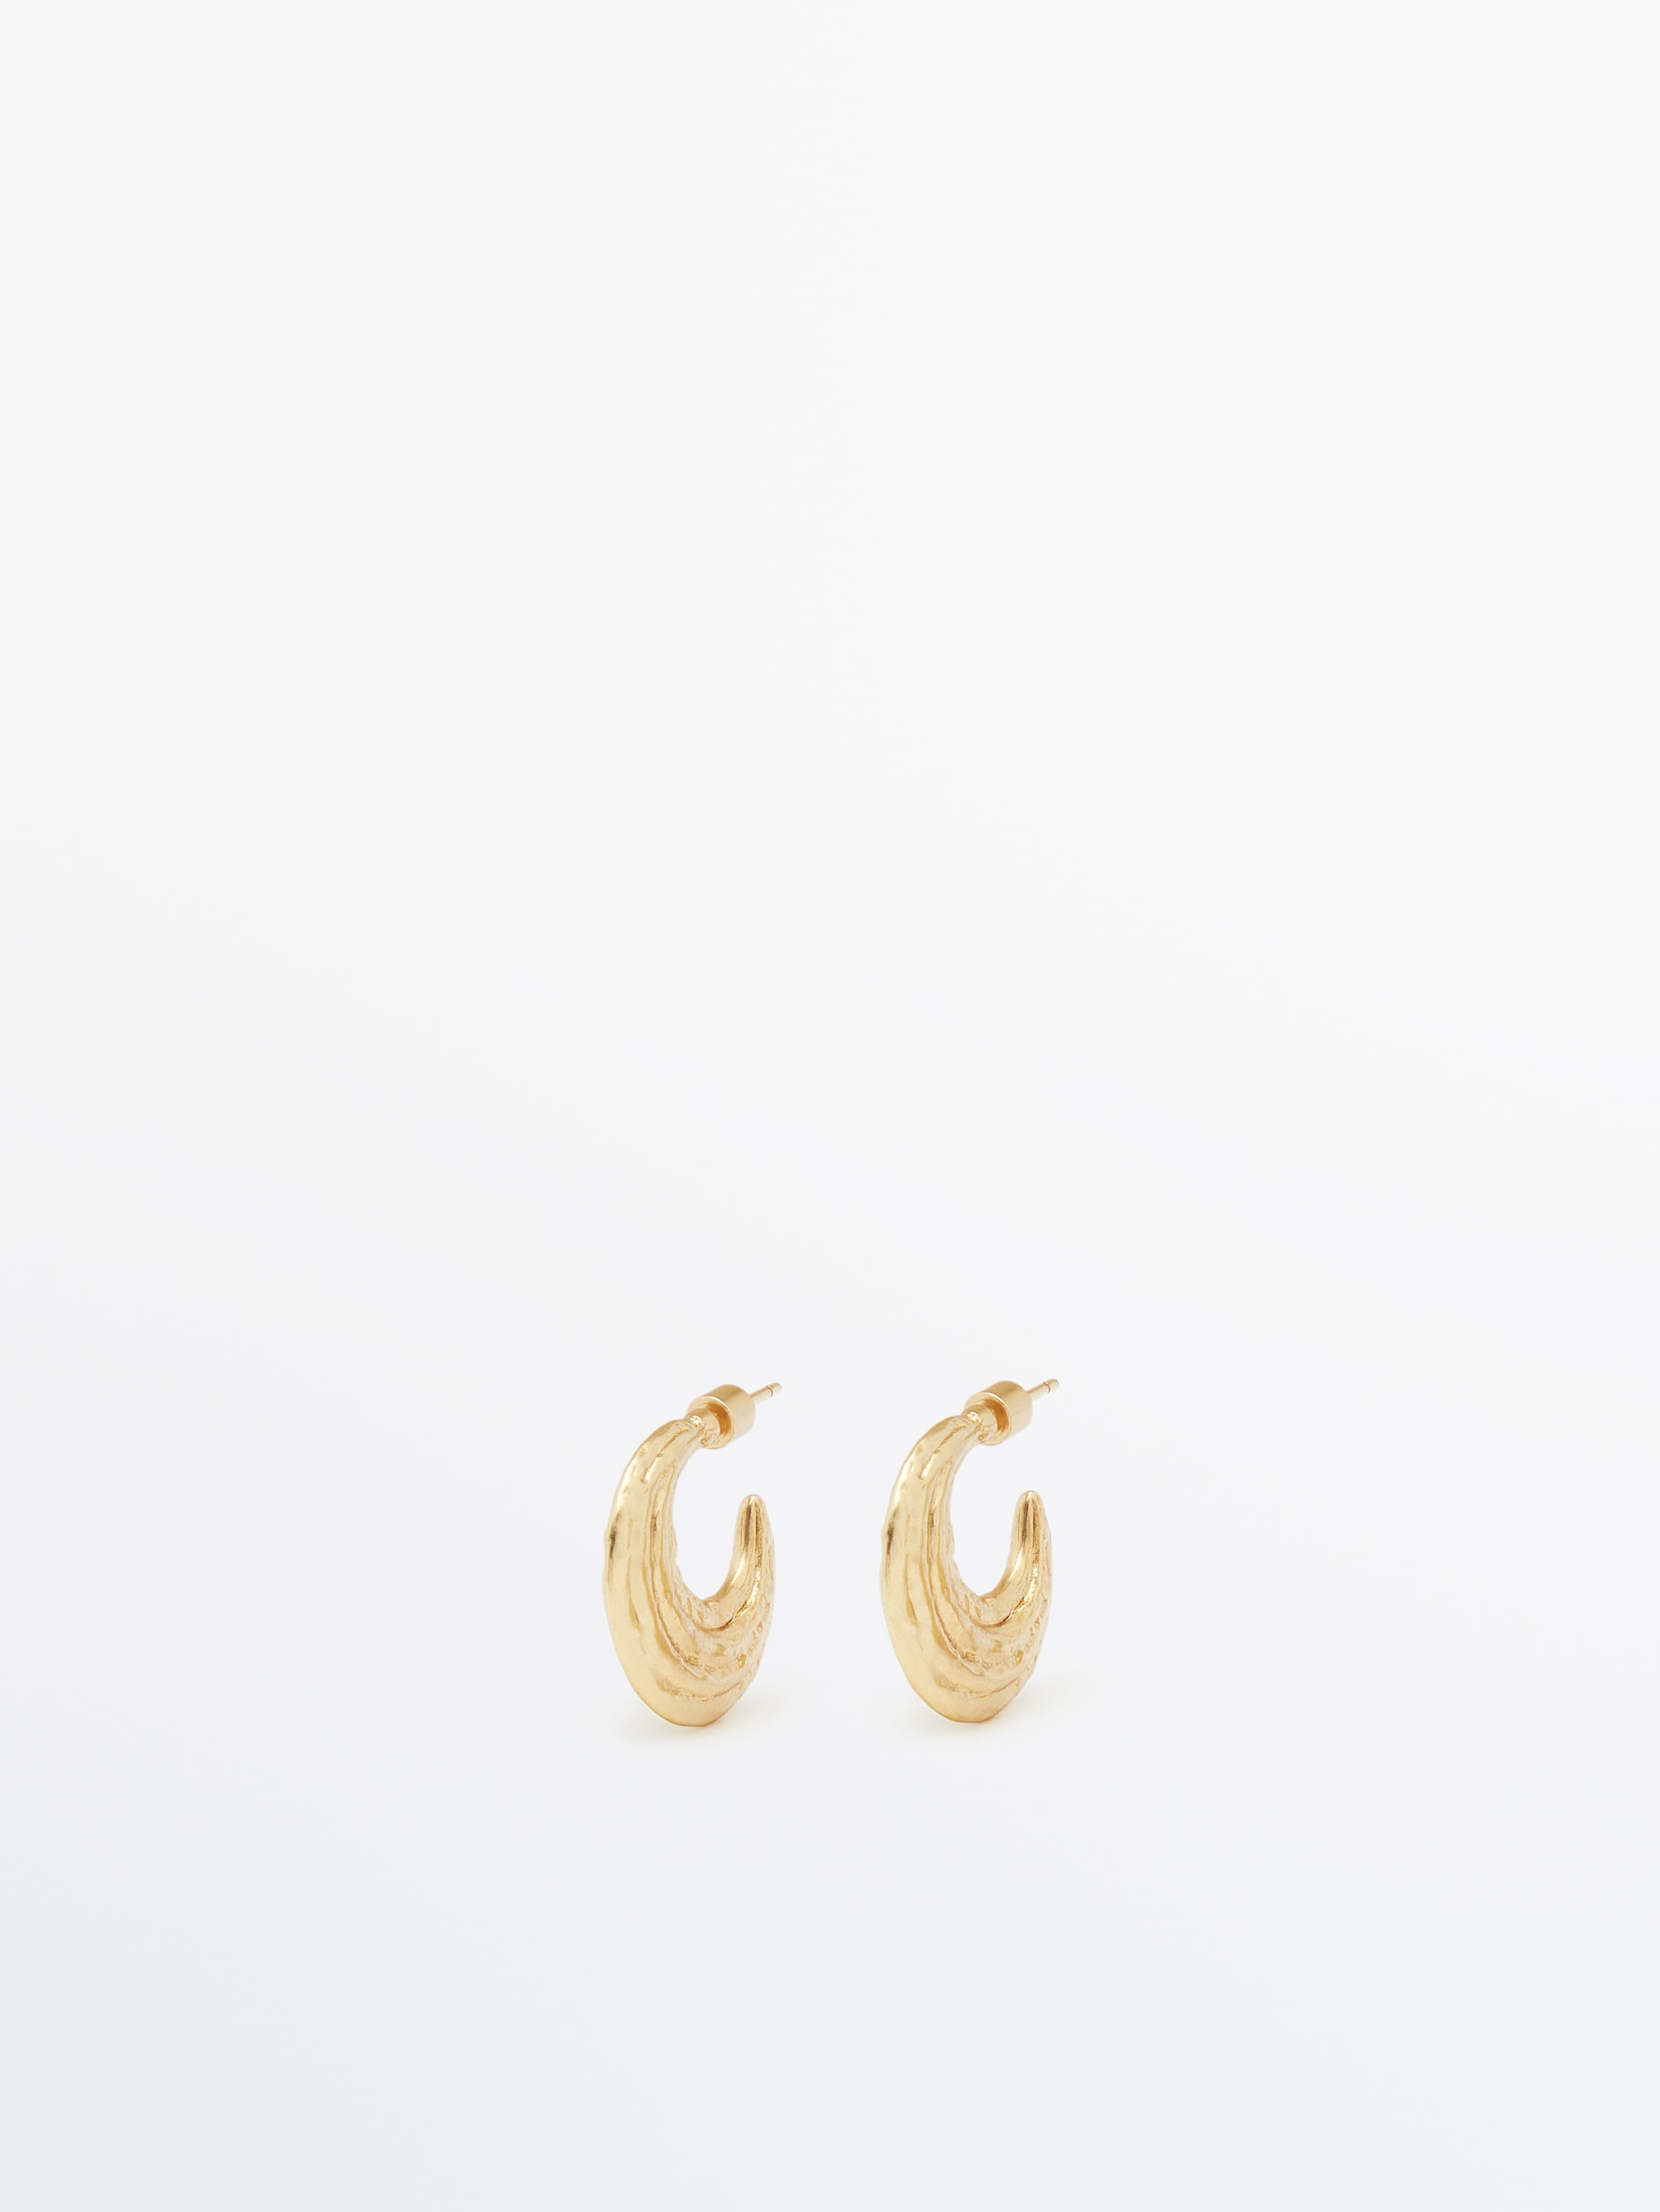 Gold-plated textured half-moon earrings